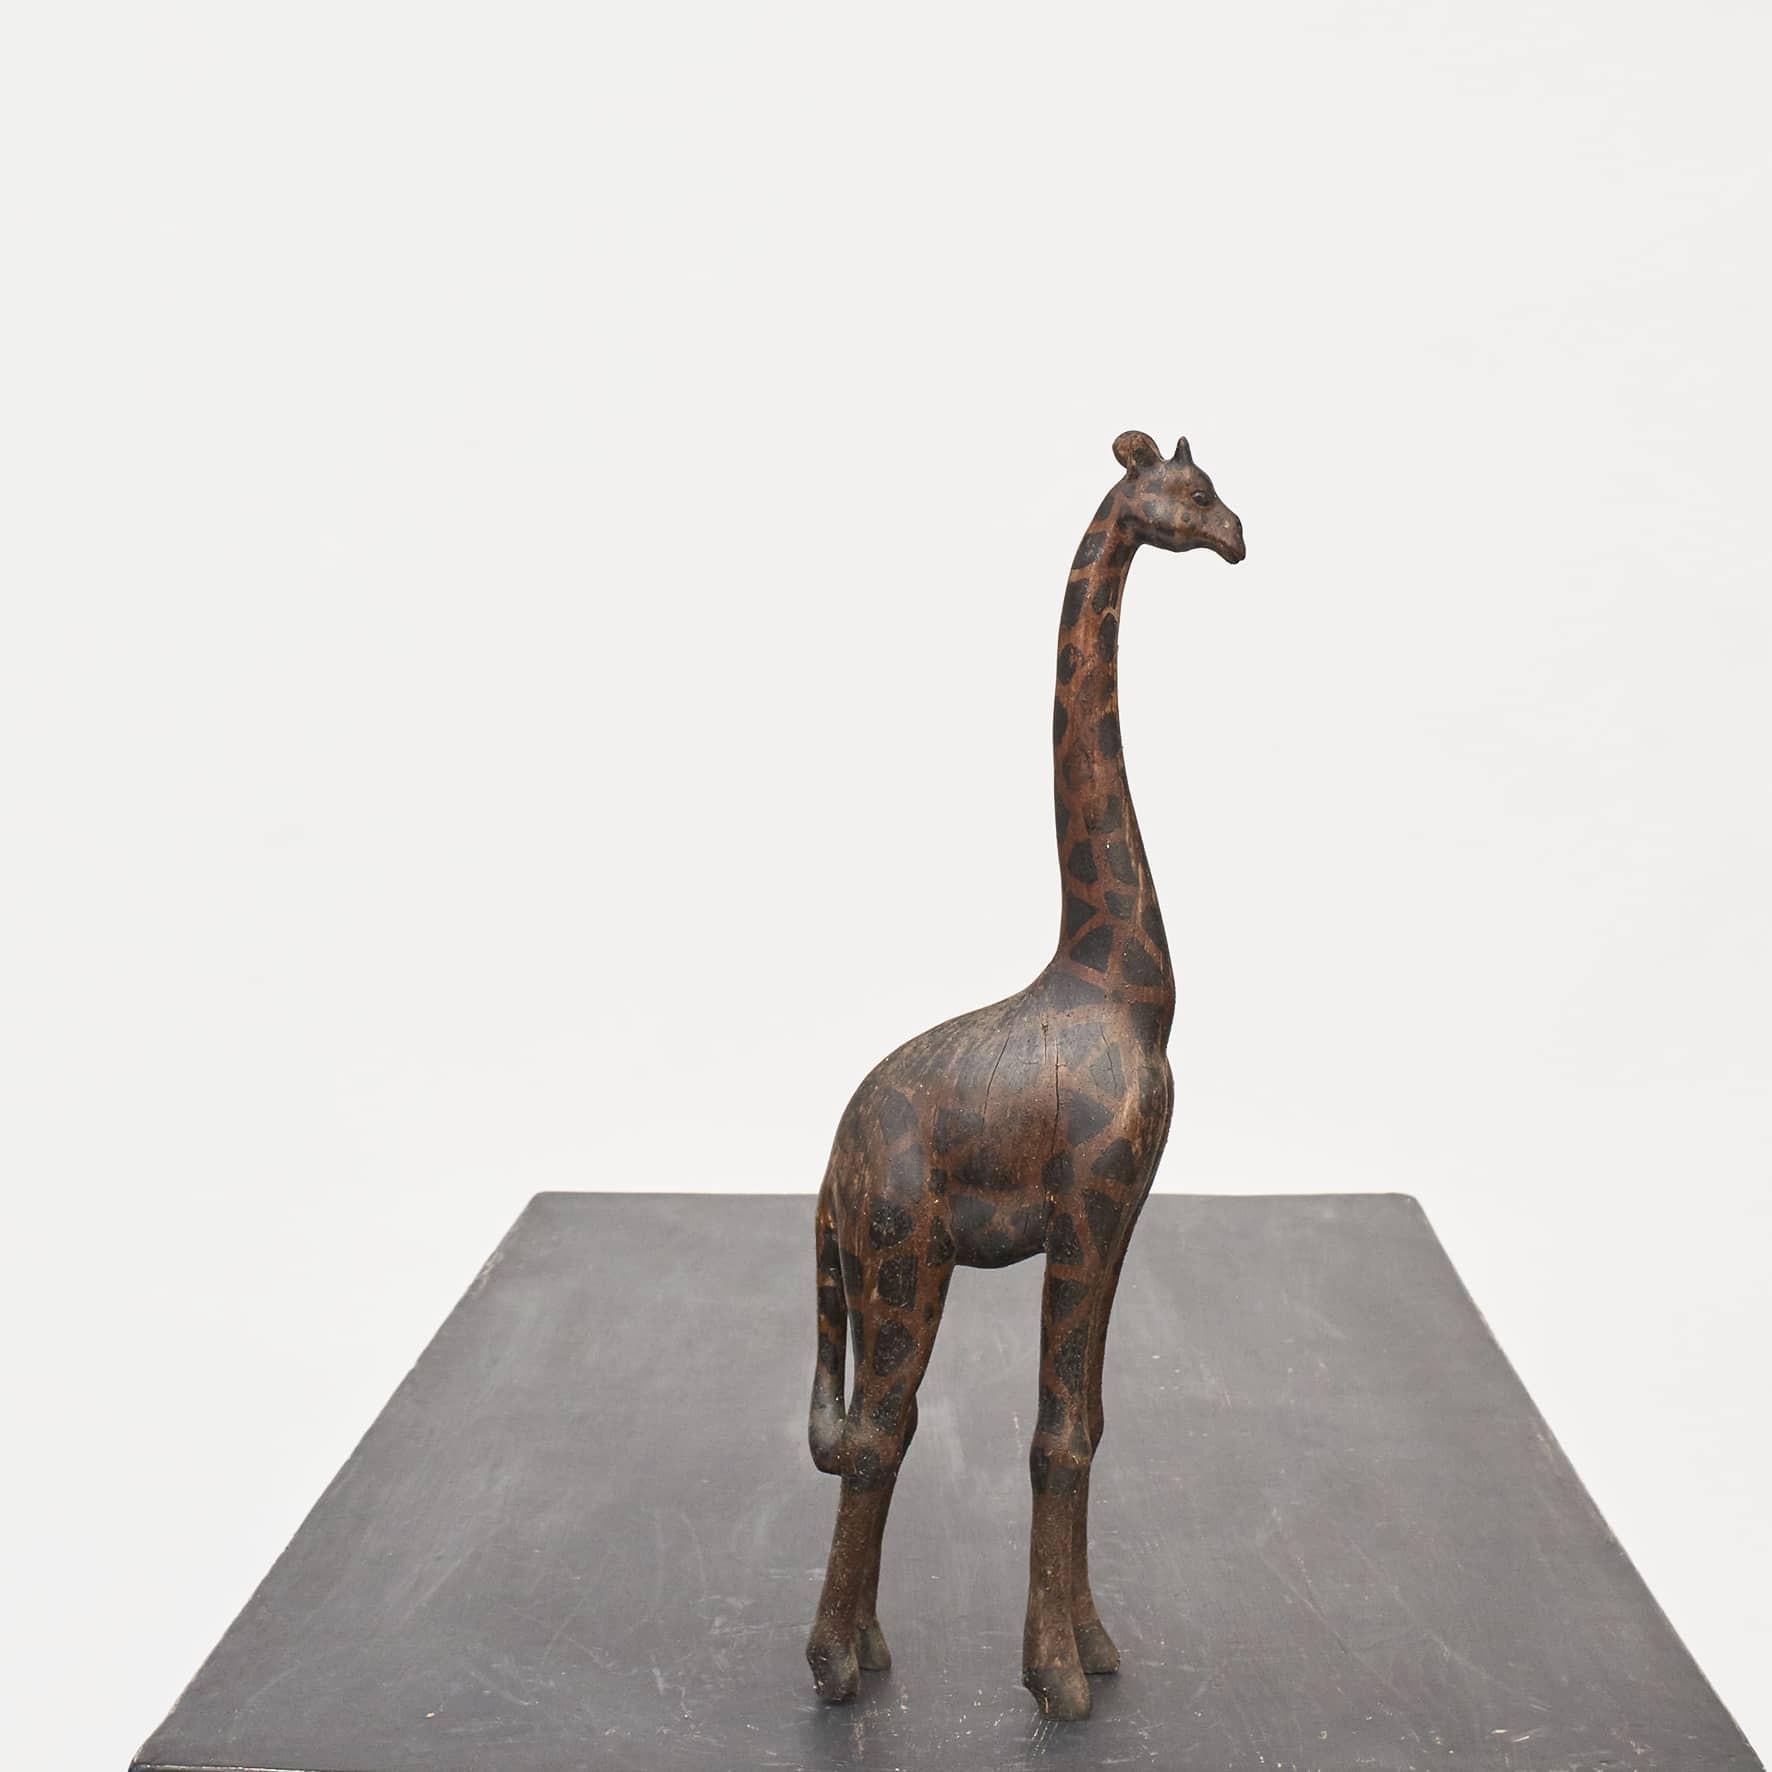 A charming vintage wooden giraffe. Hand-carved from hardwood (tropical wood) with brown and black painted surface.
From Africa, c. 50-100 years old.
In original vintage condition, with minor wear consistent with age and use.
Small chip on one ear.